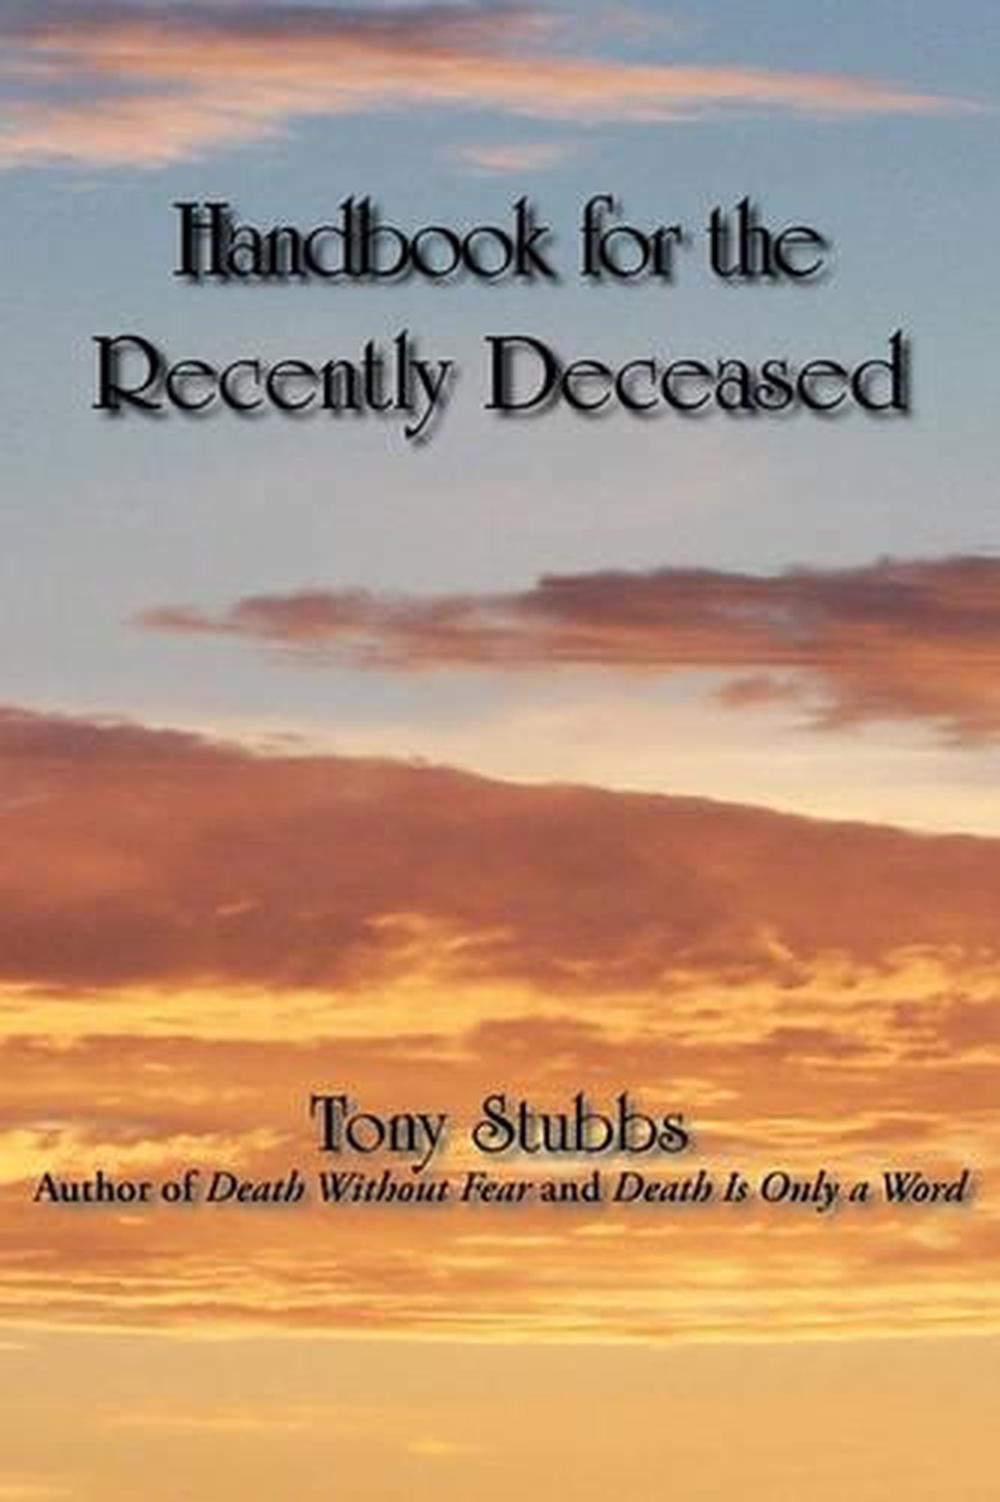 Handbook for the Recently Deceased by Tony Stubbs (English) Paperback